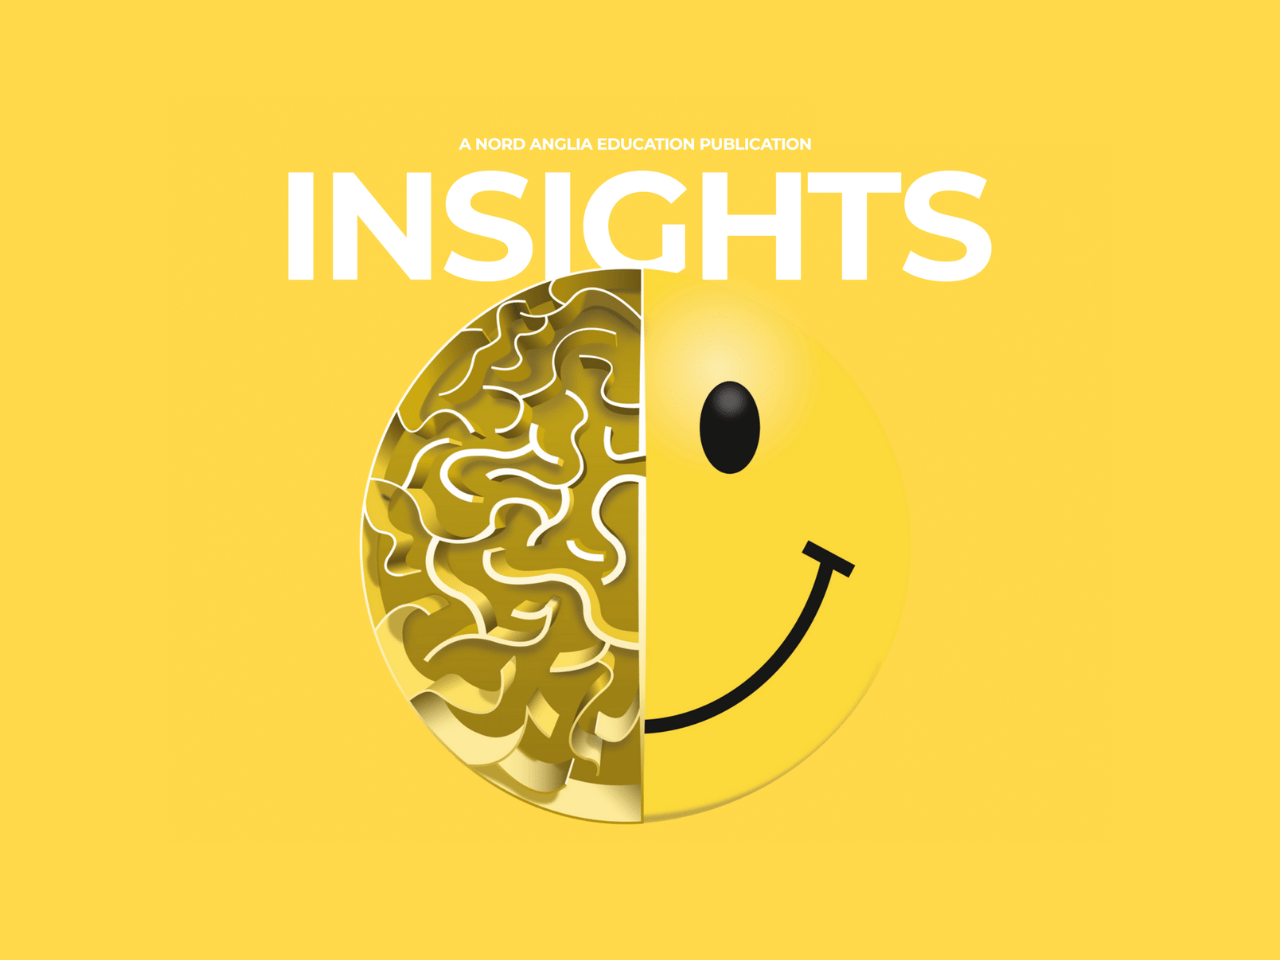 Introducing INSIGHTS—a refreshingly honest view on the future of education - Introducing INSIGHTS